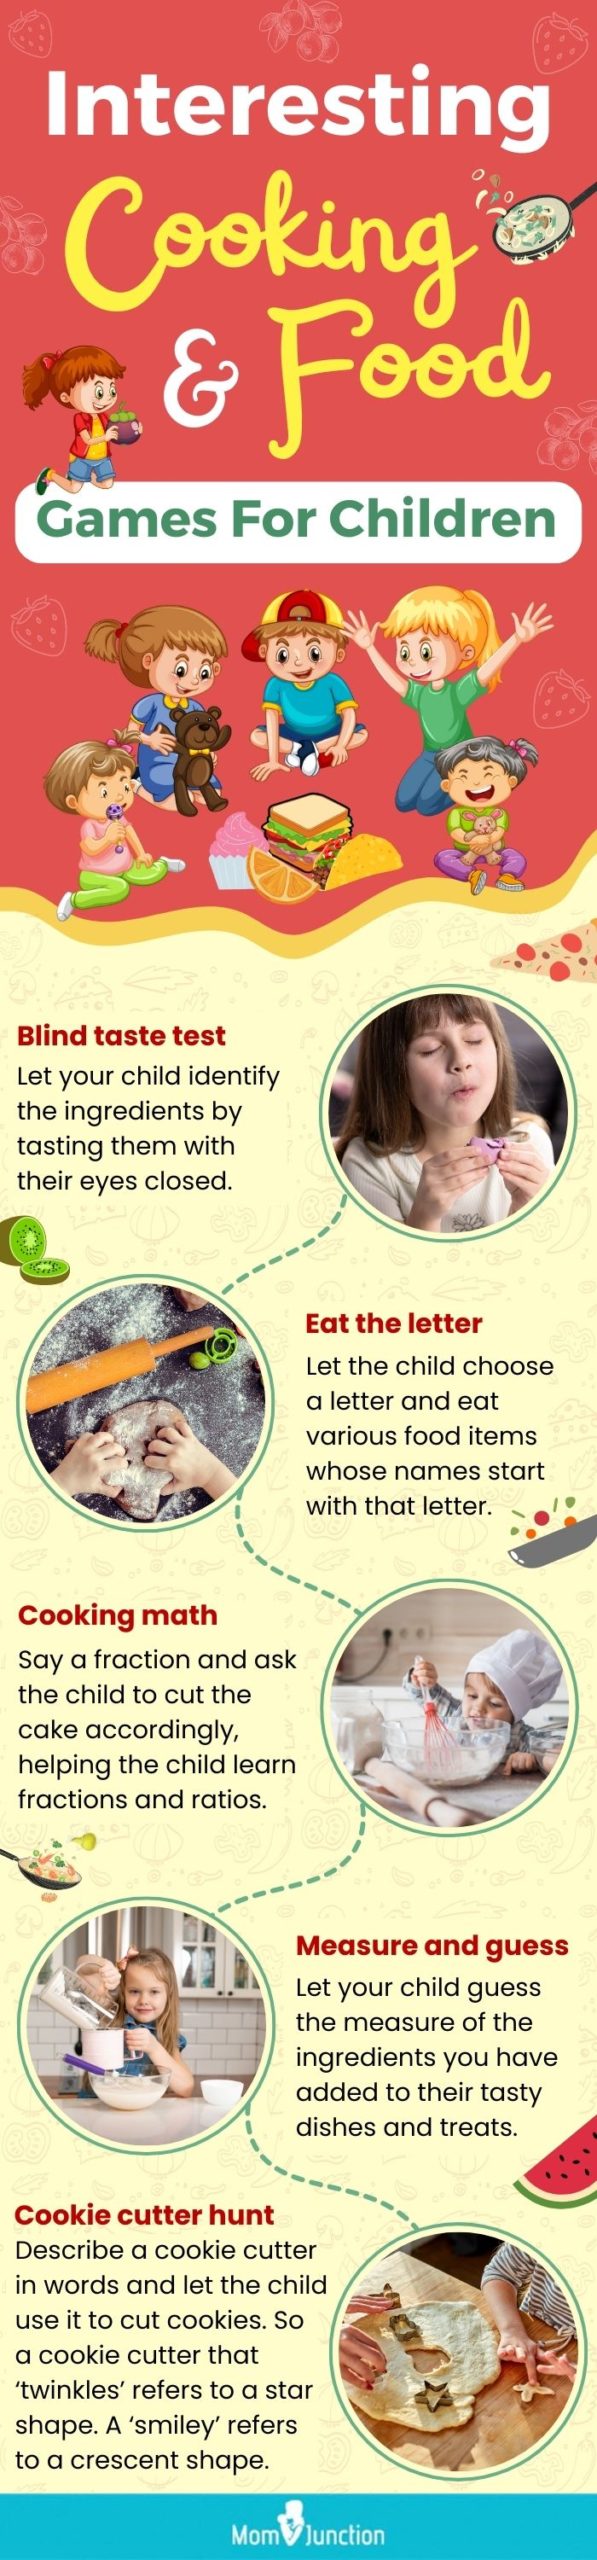 interesting cooking and food games for children (infographic)